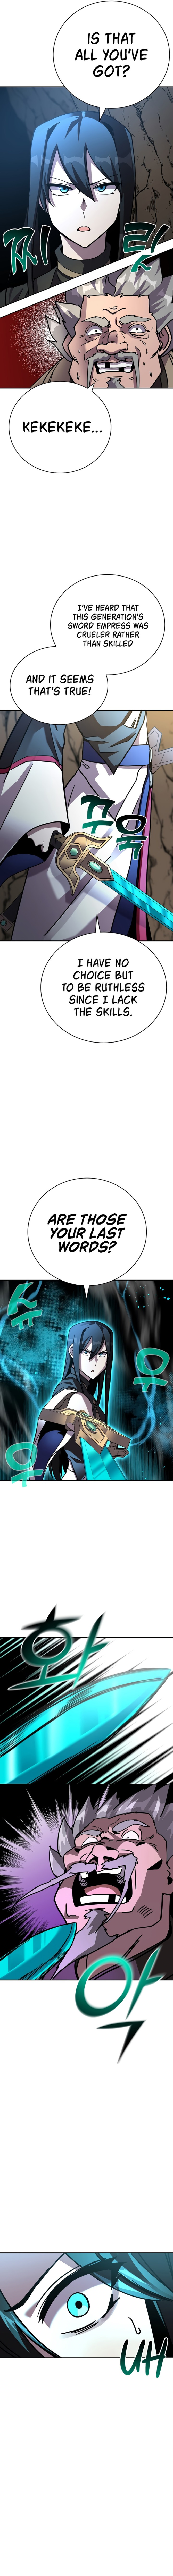 Martial Streamer - Chapter 28 Page 13